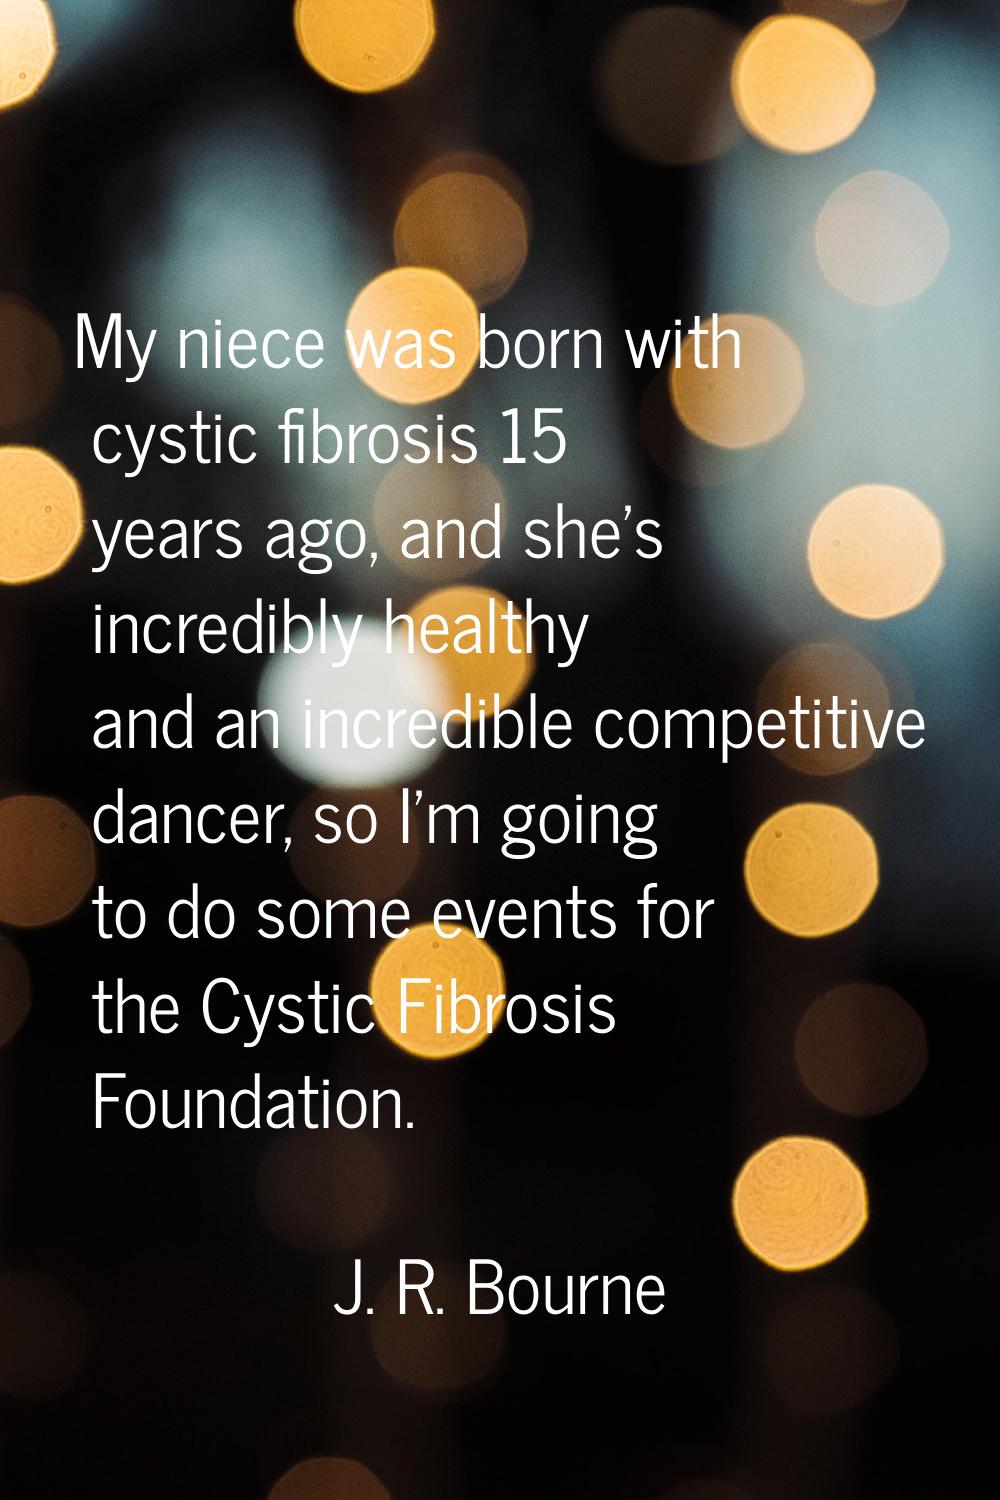 My niece was born with cystic fibrosis 15 years ago, and she's incredibly healthy and an incredible